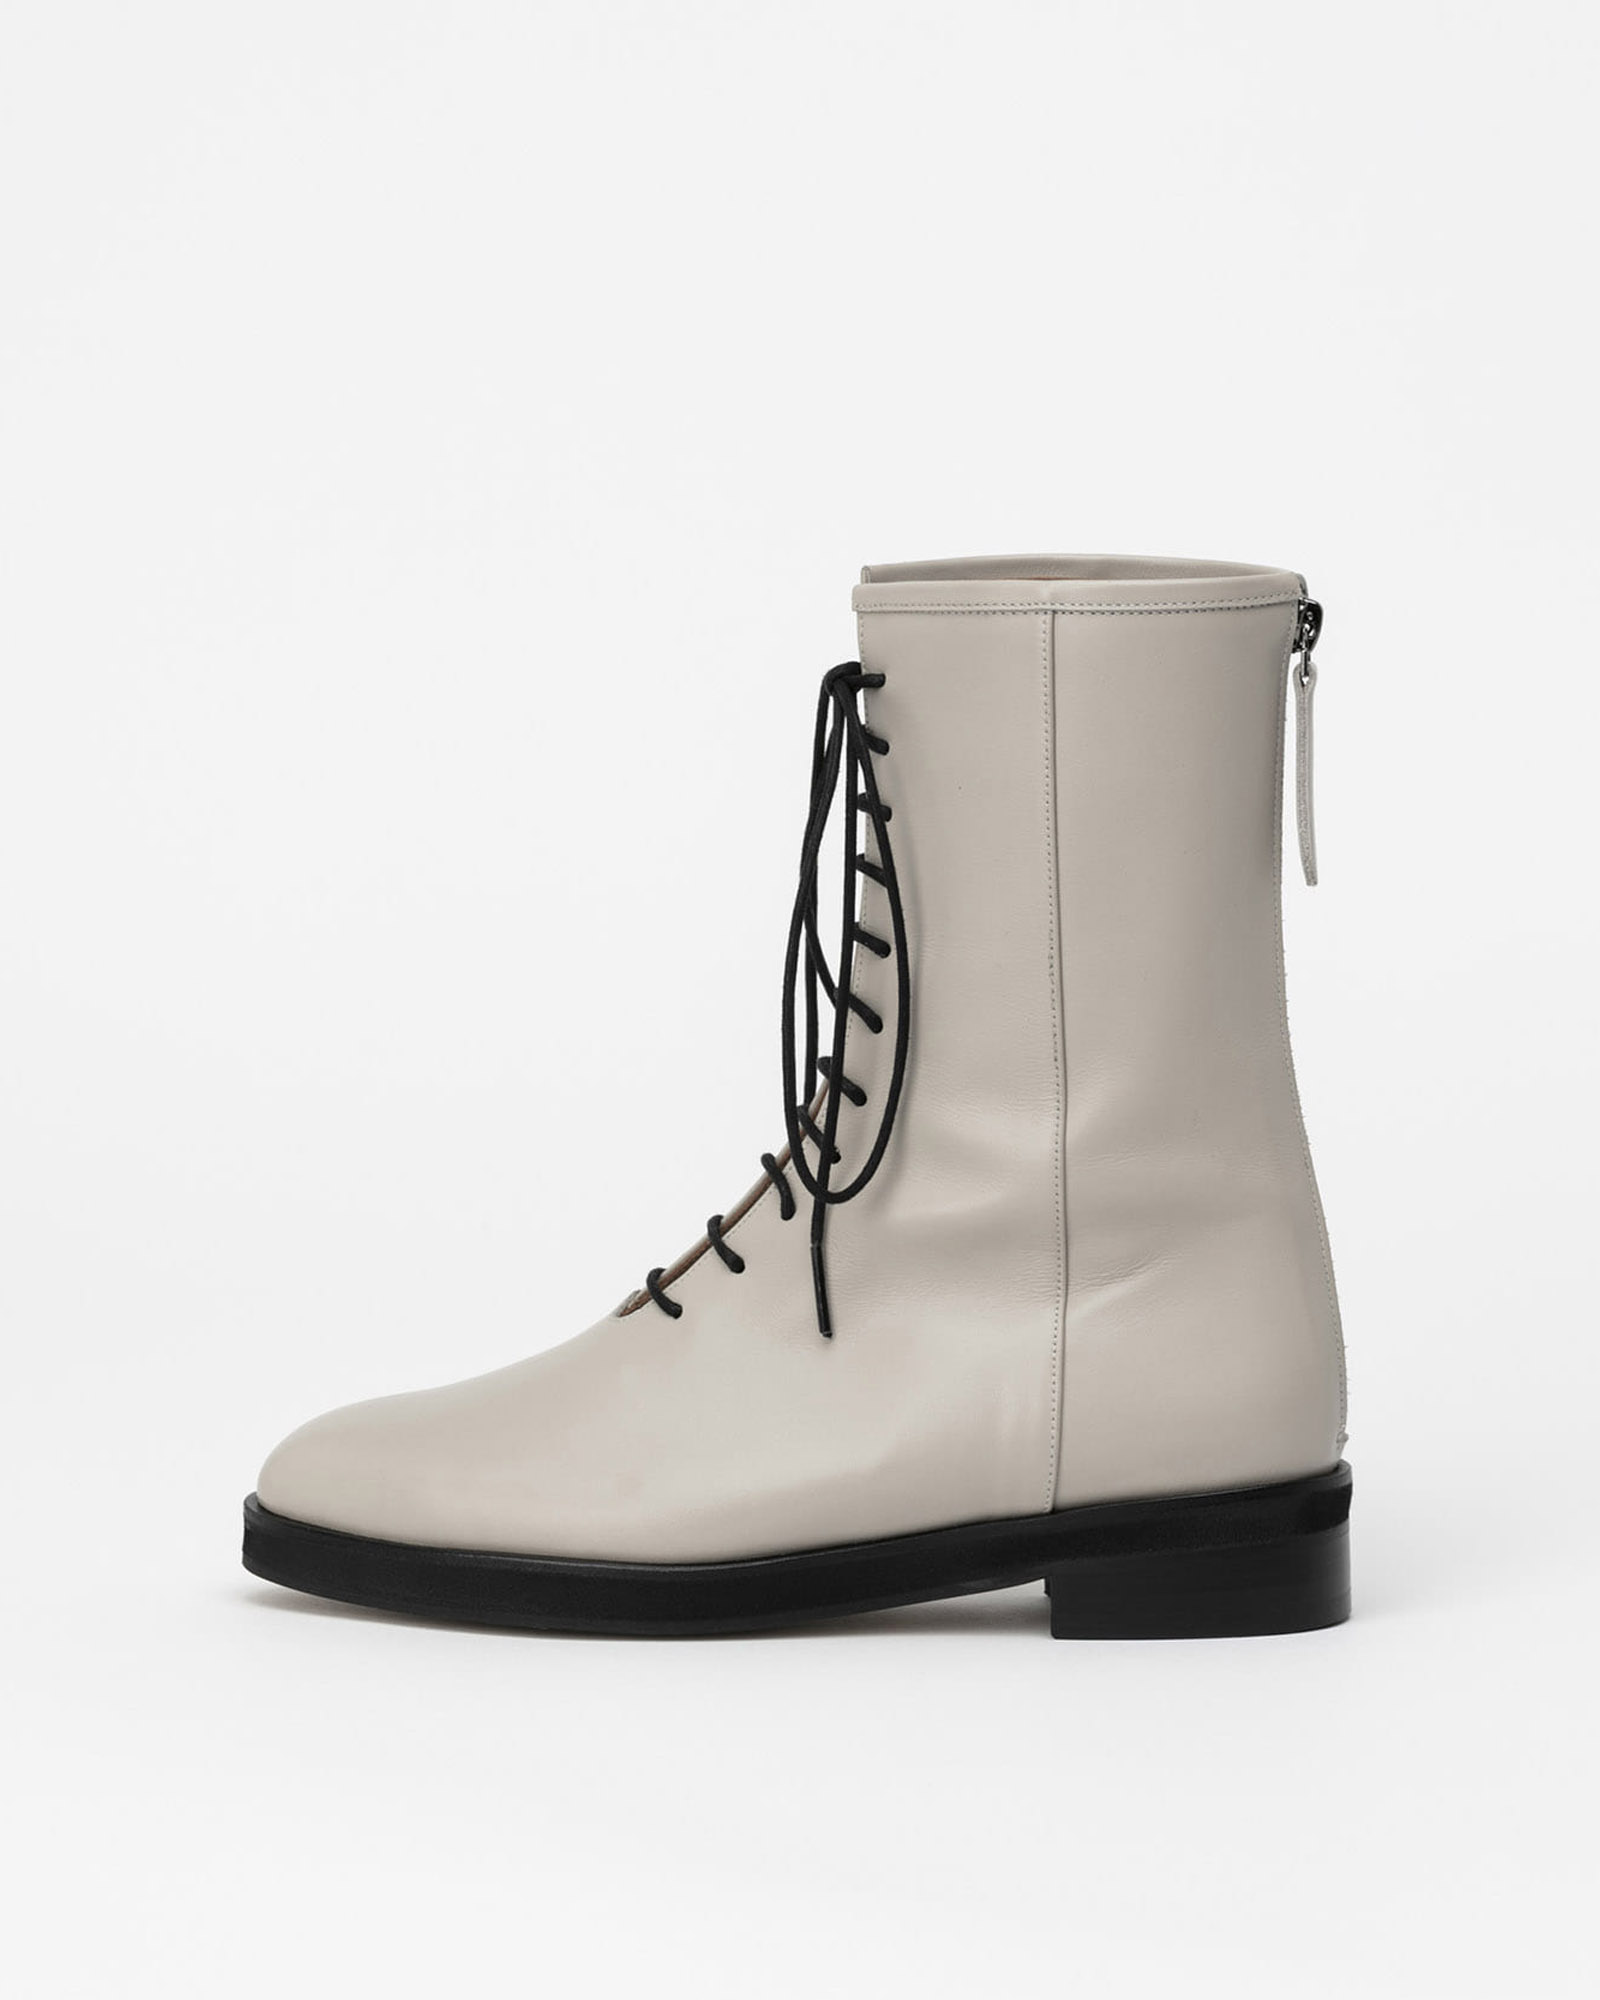 Lenma Lace-up Combat Boots in Taupe Ivory